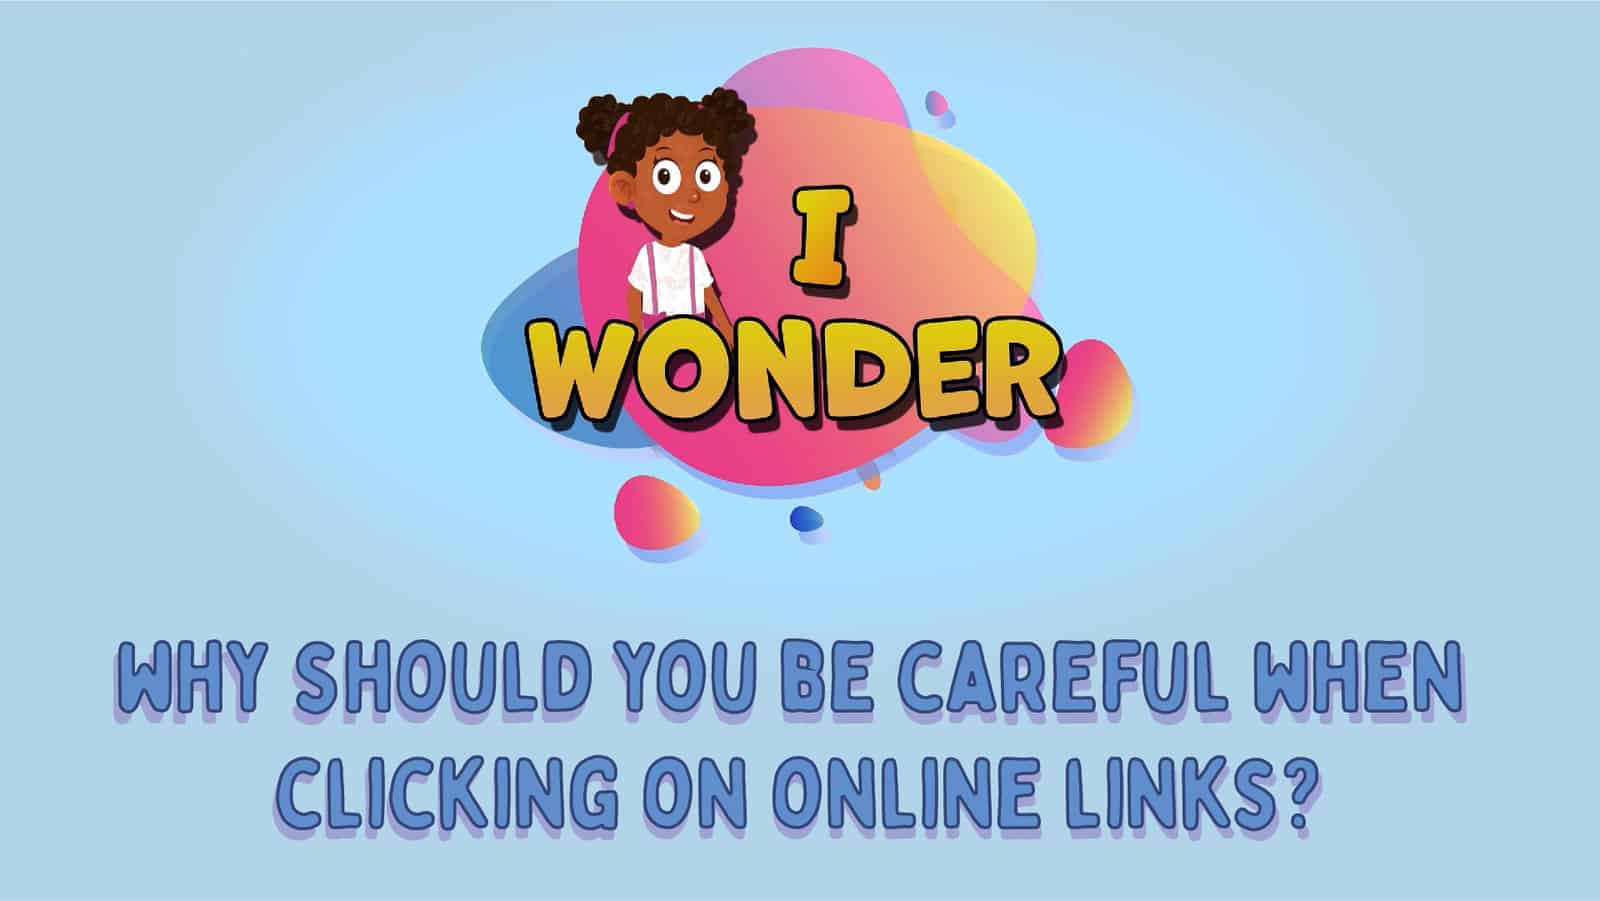 Why Should You Be Careful When Clicking On Online Links?